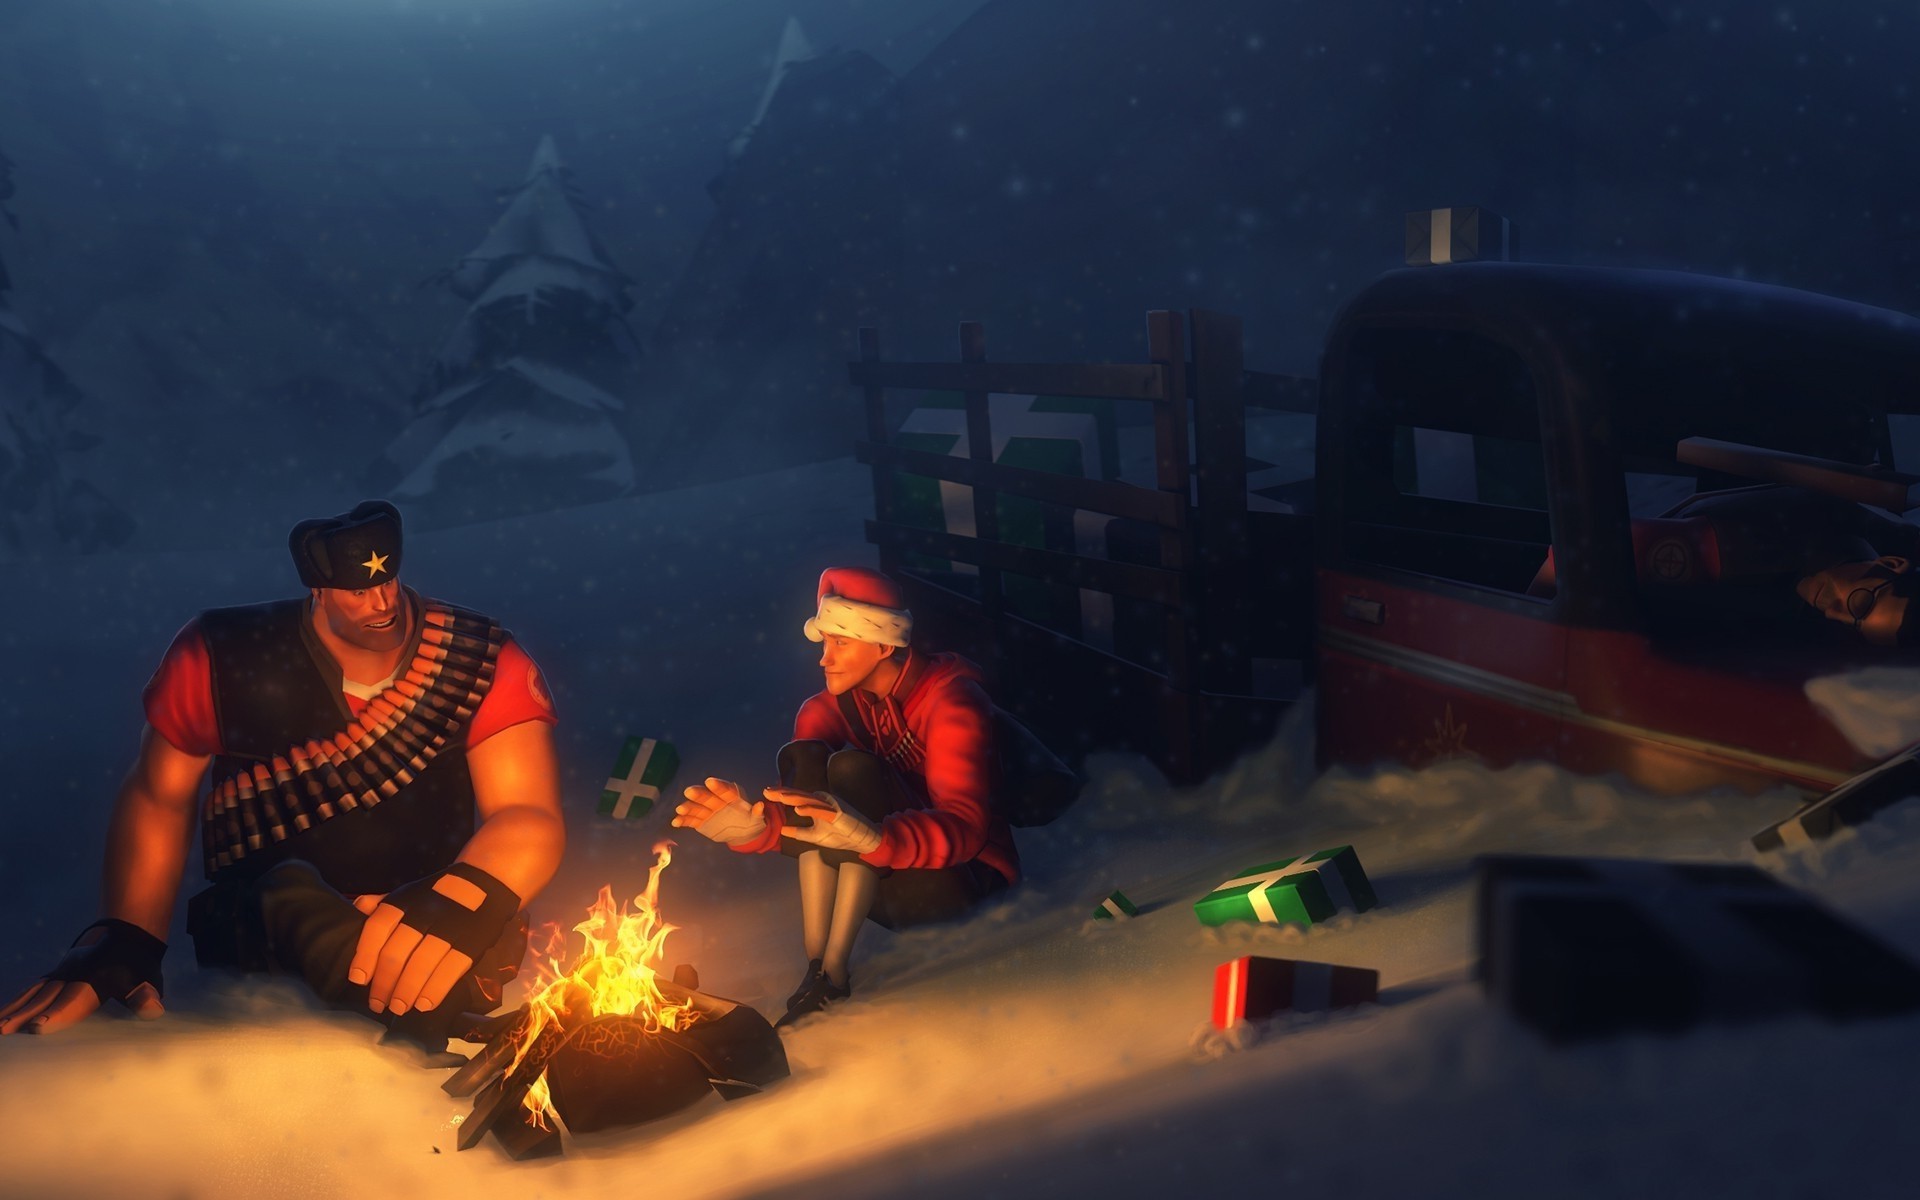 1920x1200 ... Digital Art, Team Fortress 2, Fire, Camping, Presents, Happy New Year,  Truck, Heavy, Snow, Campfire Wallpapers HD / Desktop and Mobile Backgrounds